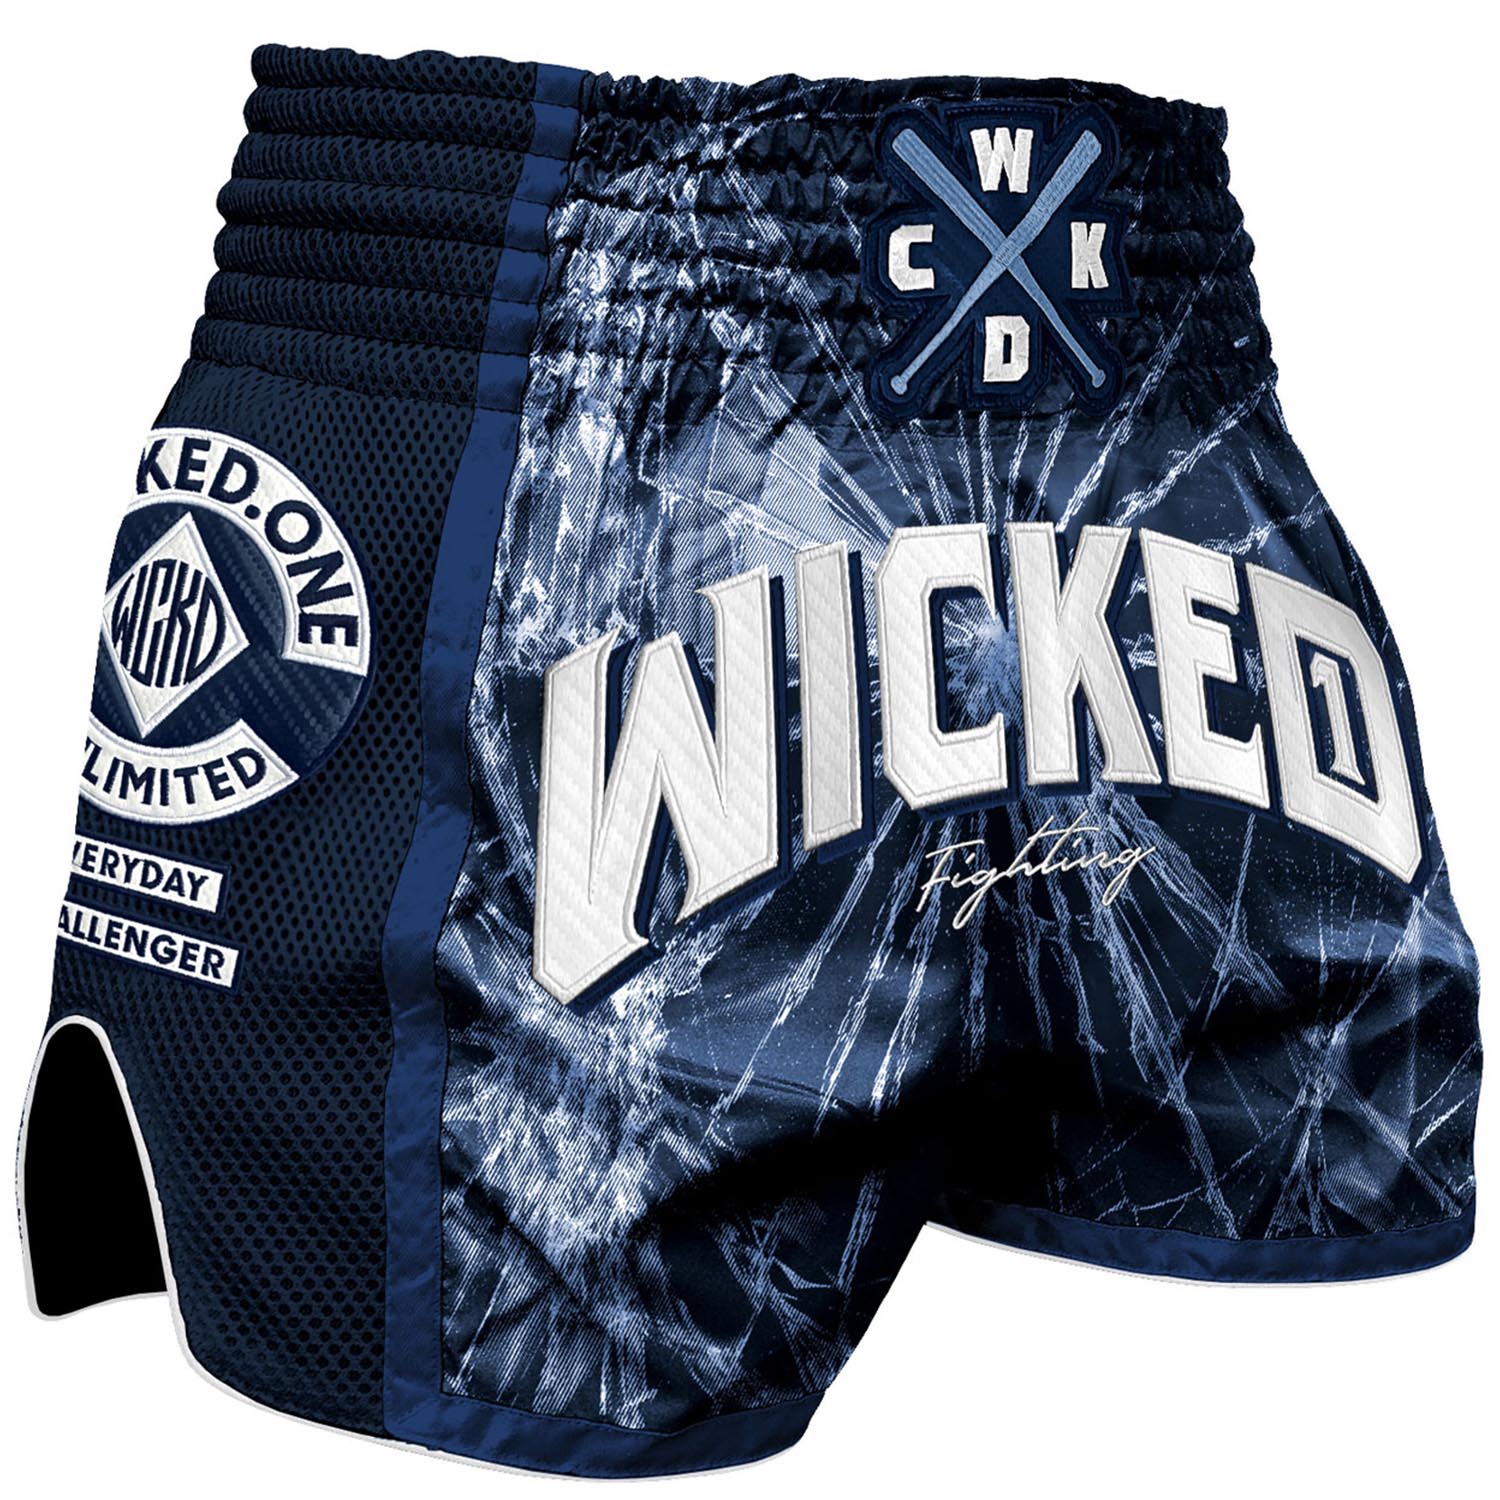 Wicked One Muay Thai Shorts, Trouble, navy